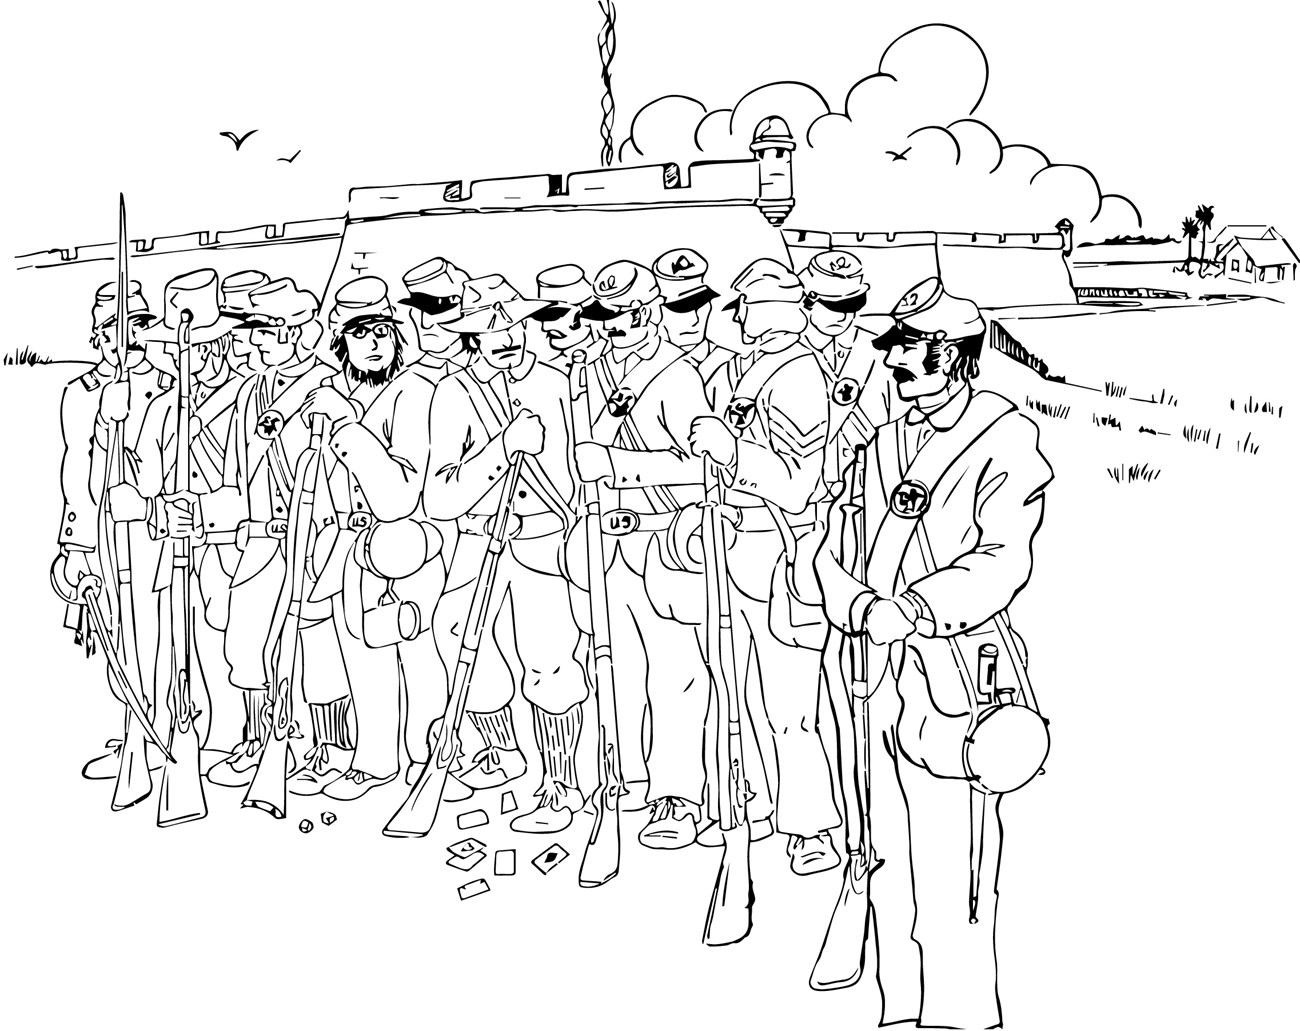 Coloring Page of a dozen Federal Troops in 1862 standing in front of the fort.